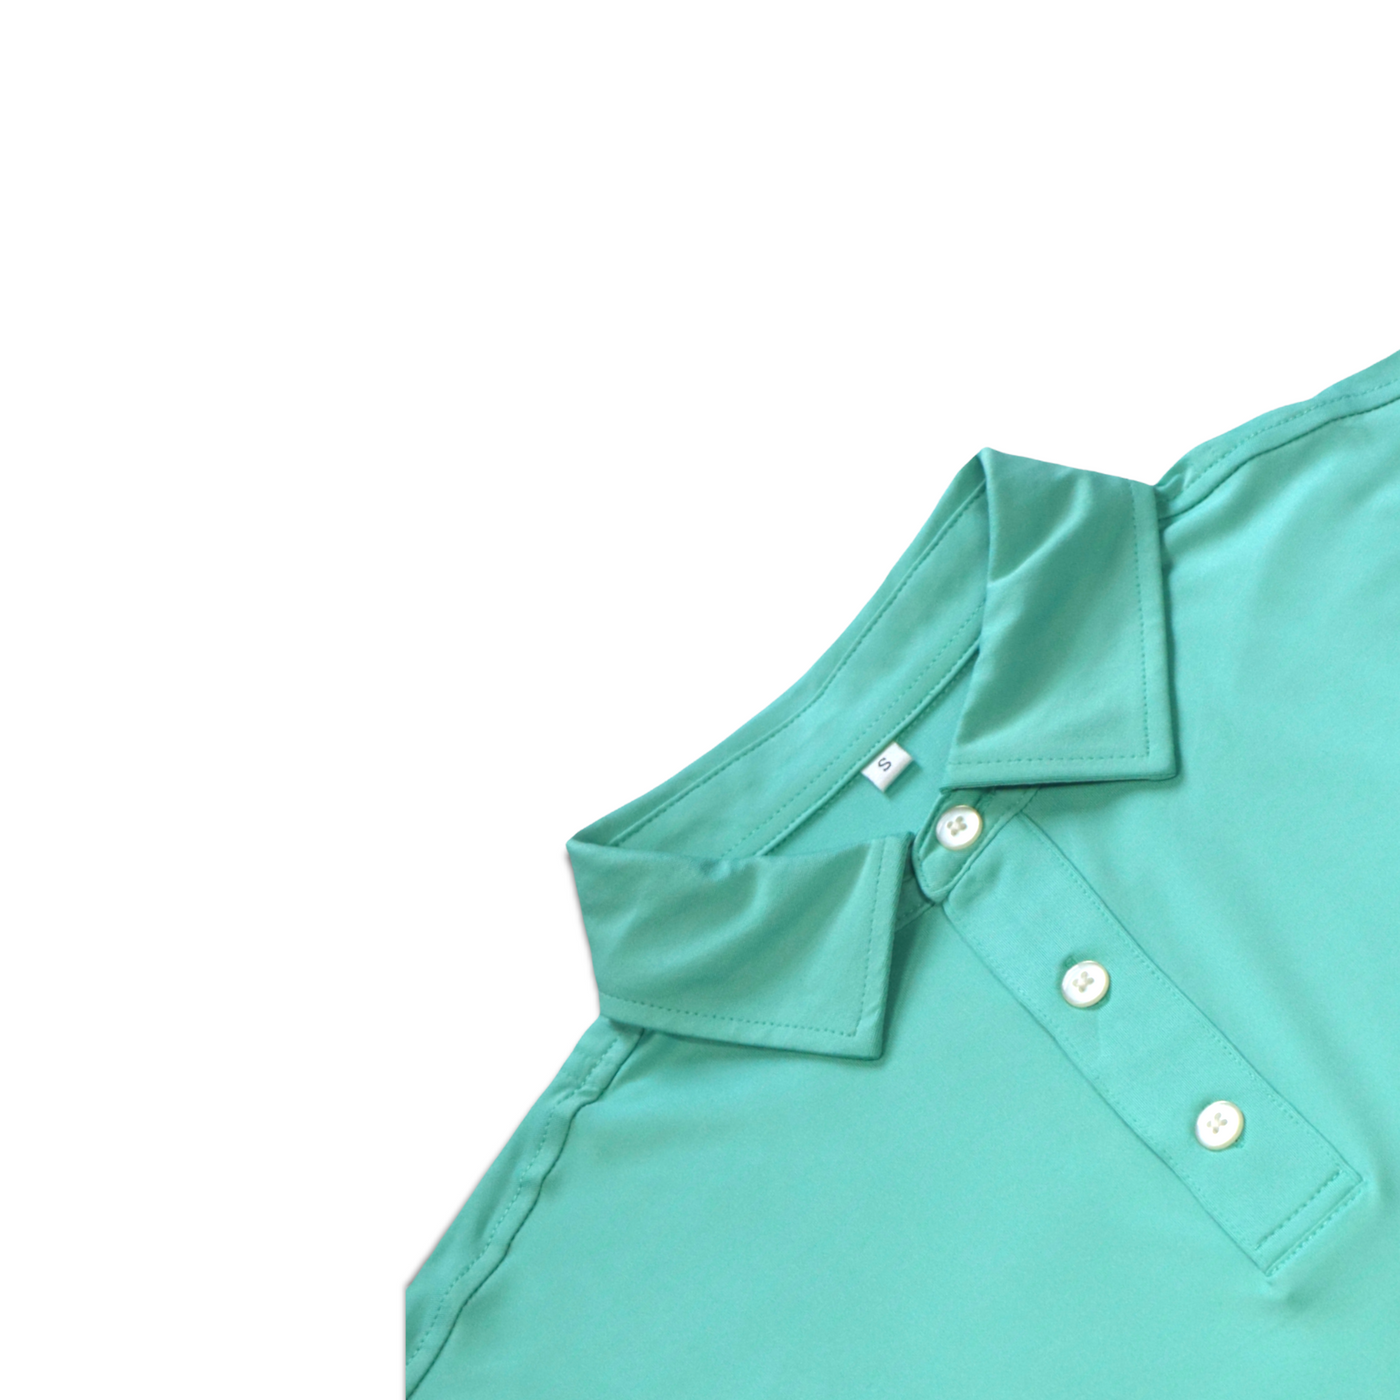 The Statement Performance Polo